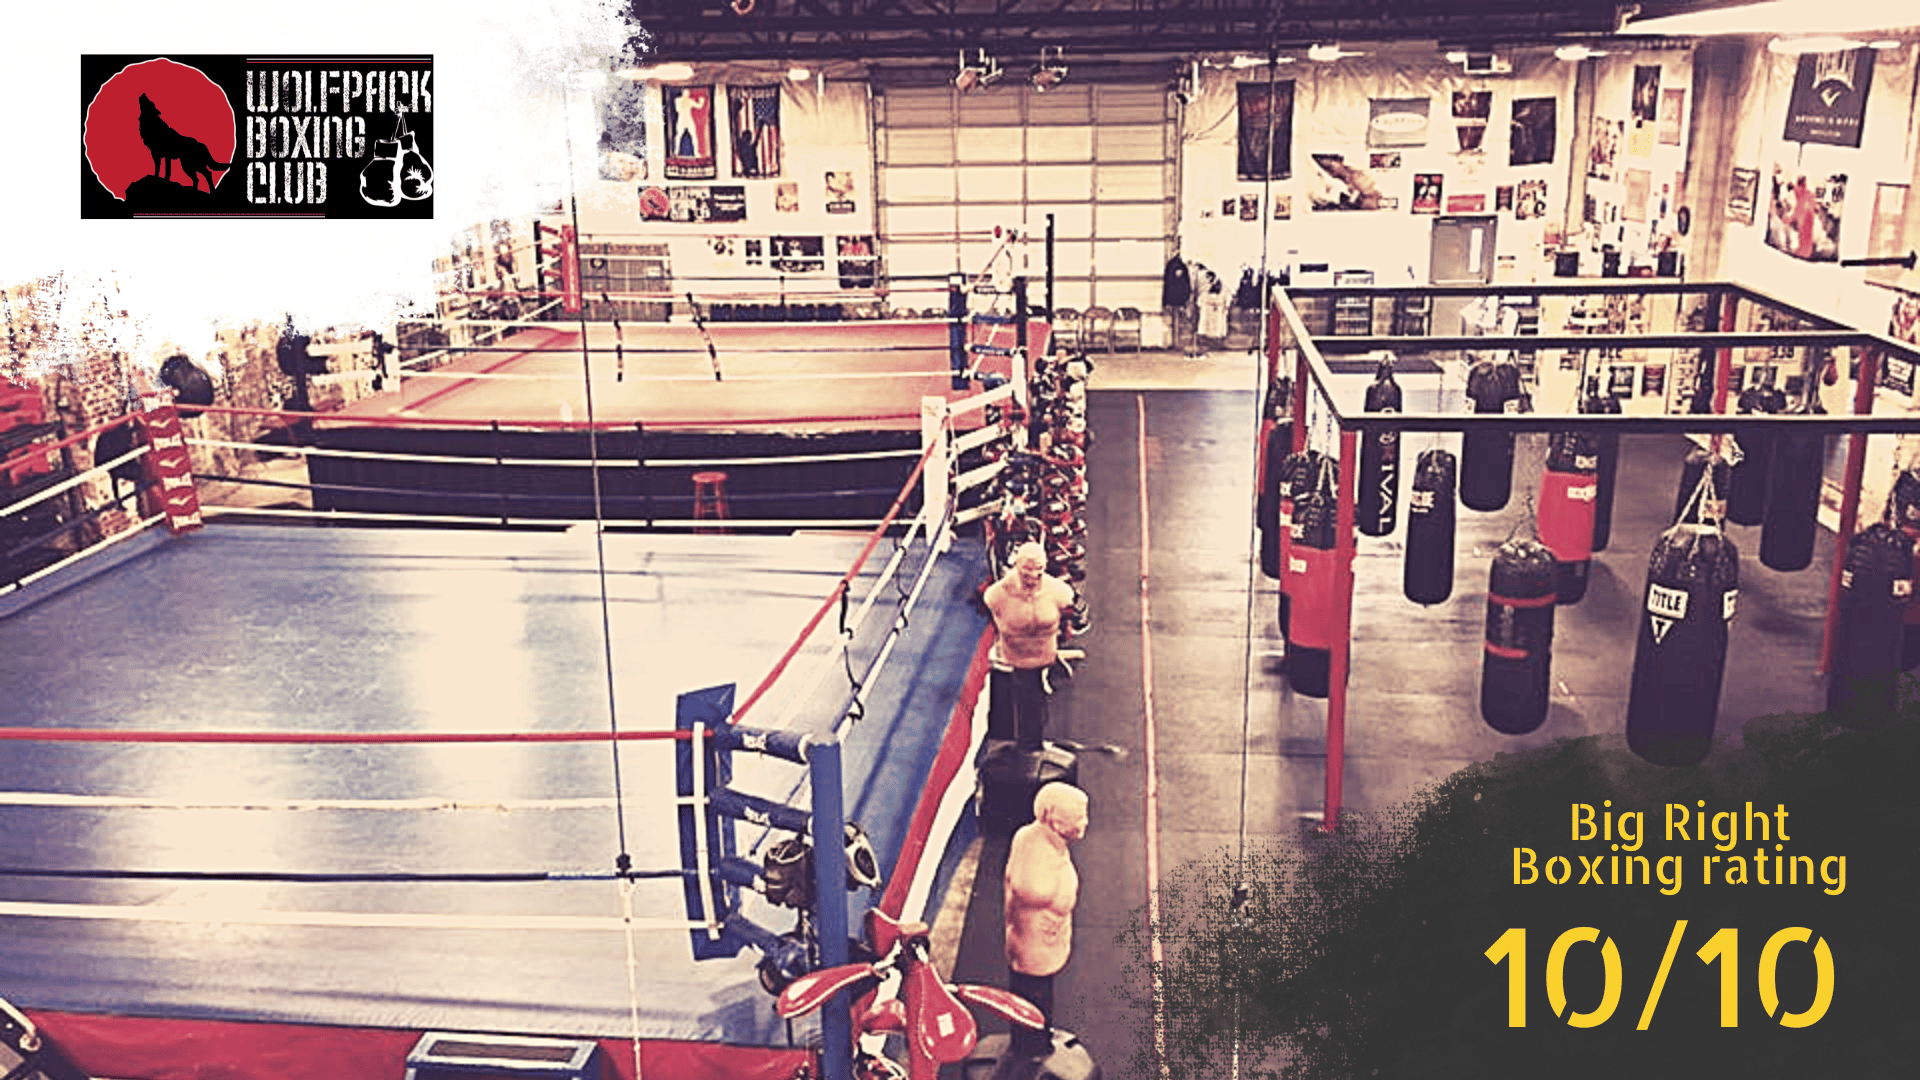 Wolfpack boxing gym in pittsburgh